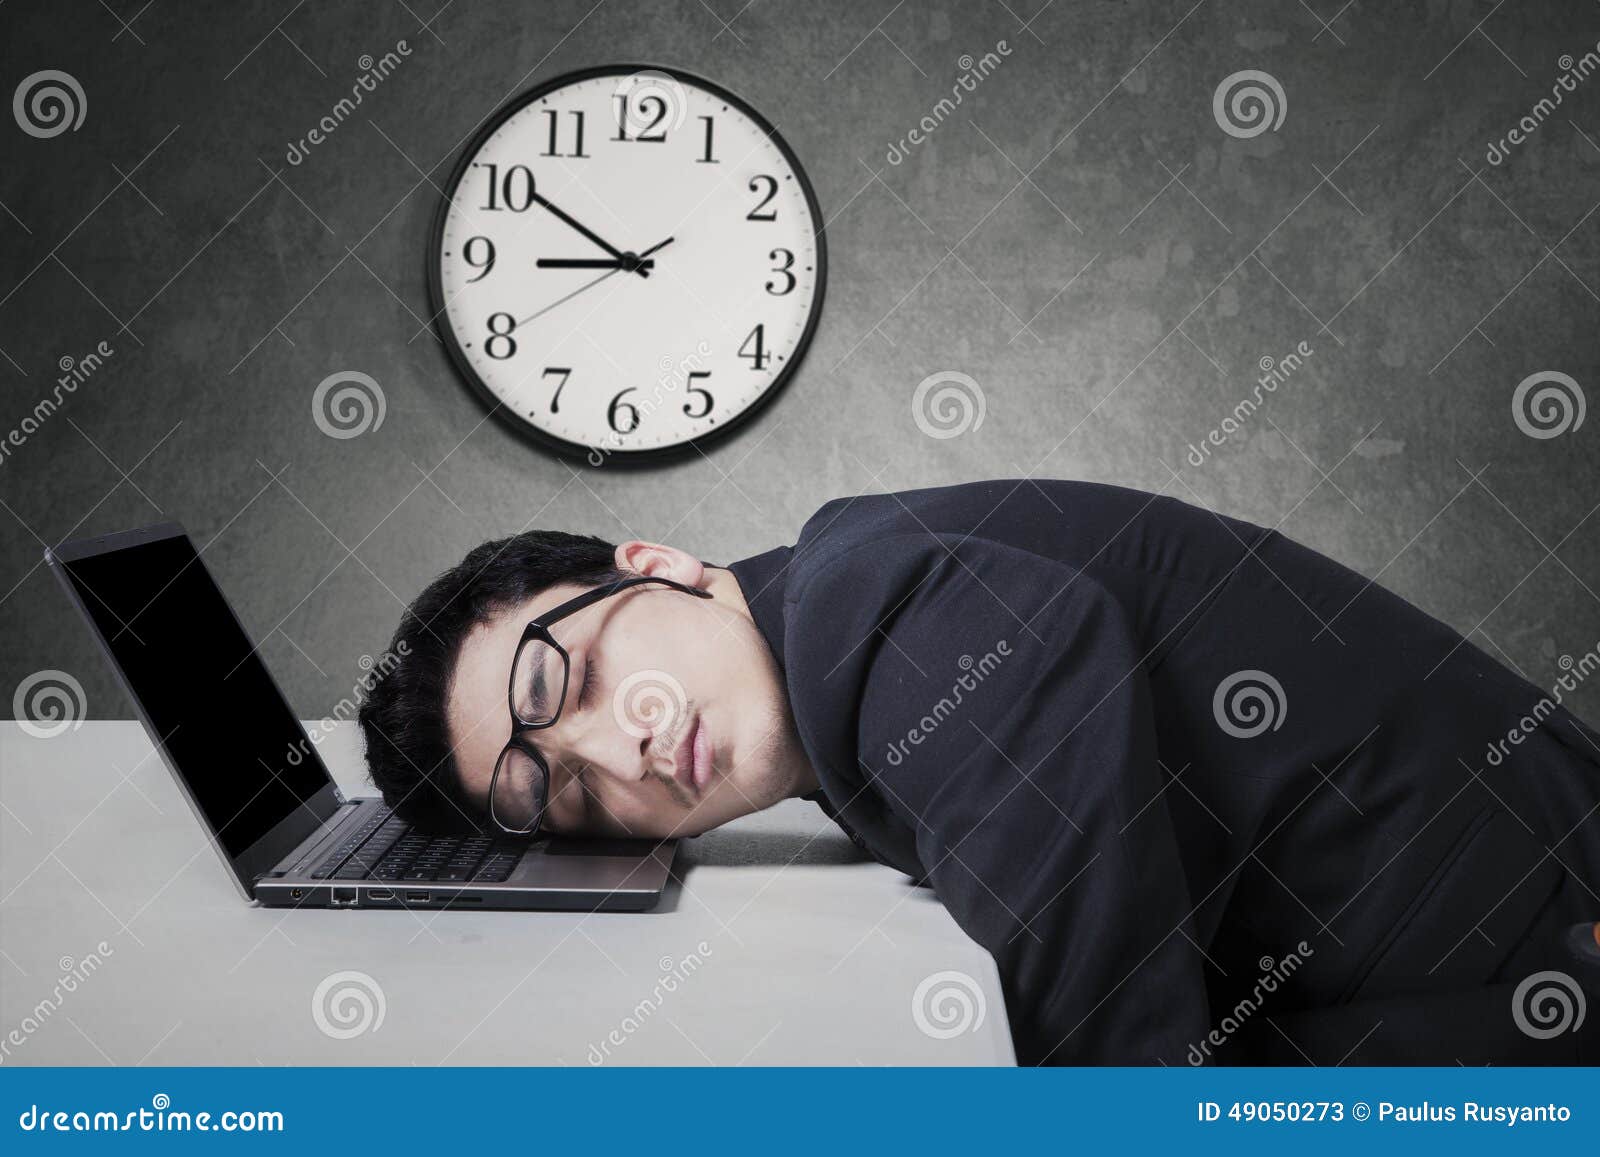 manager work overtime and sleep on laptop